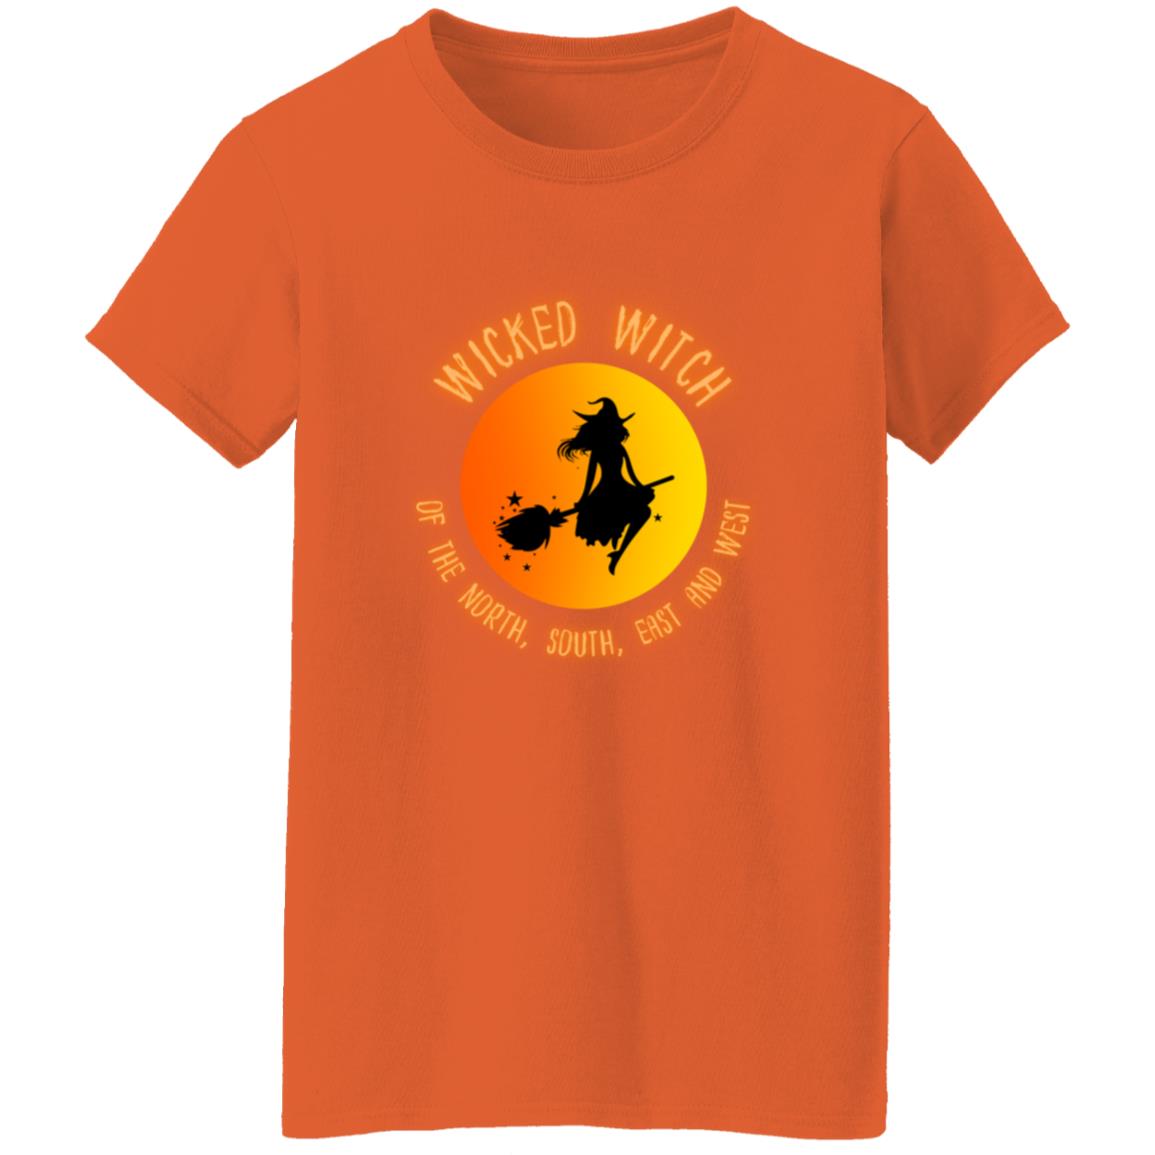 Wicked Witch of the North South East and West Wicked With of the North, South, East & West Ladies' Halloween T-Shirt